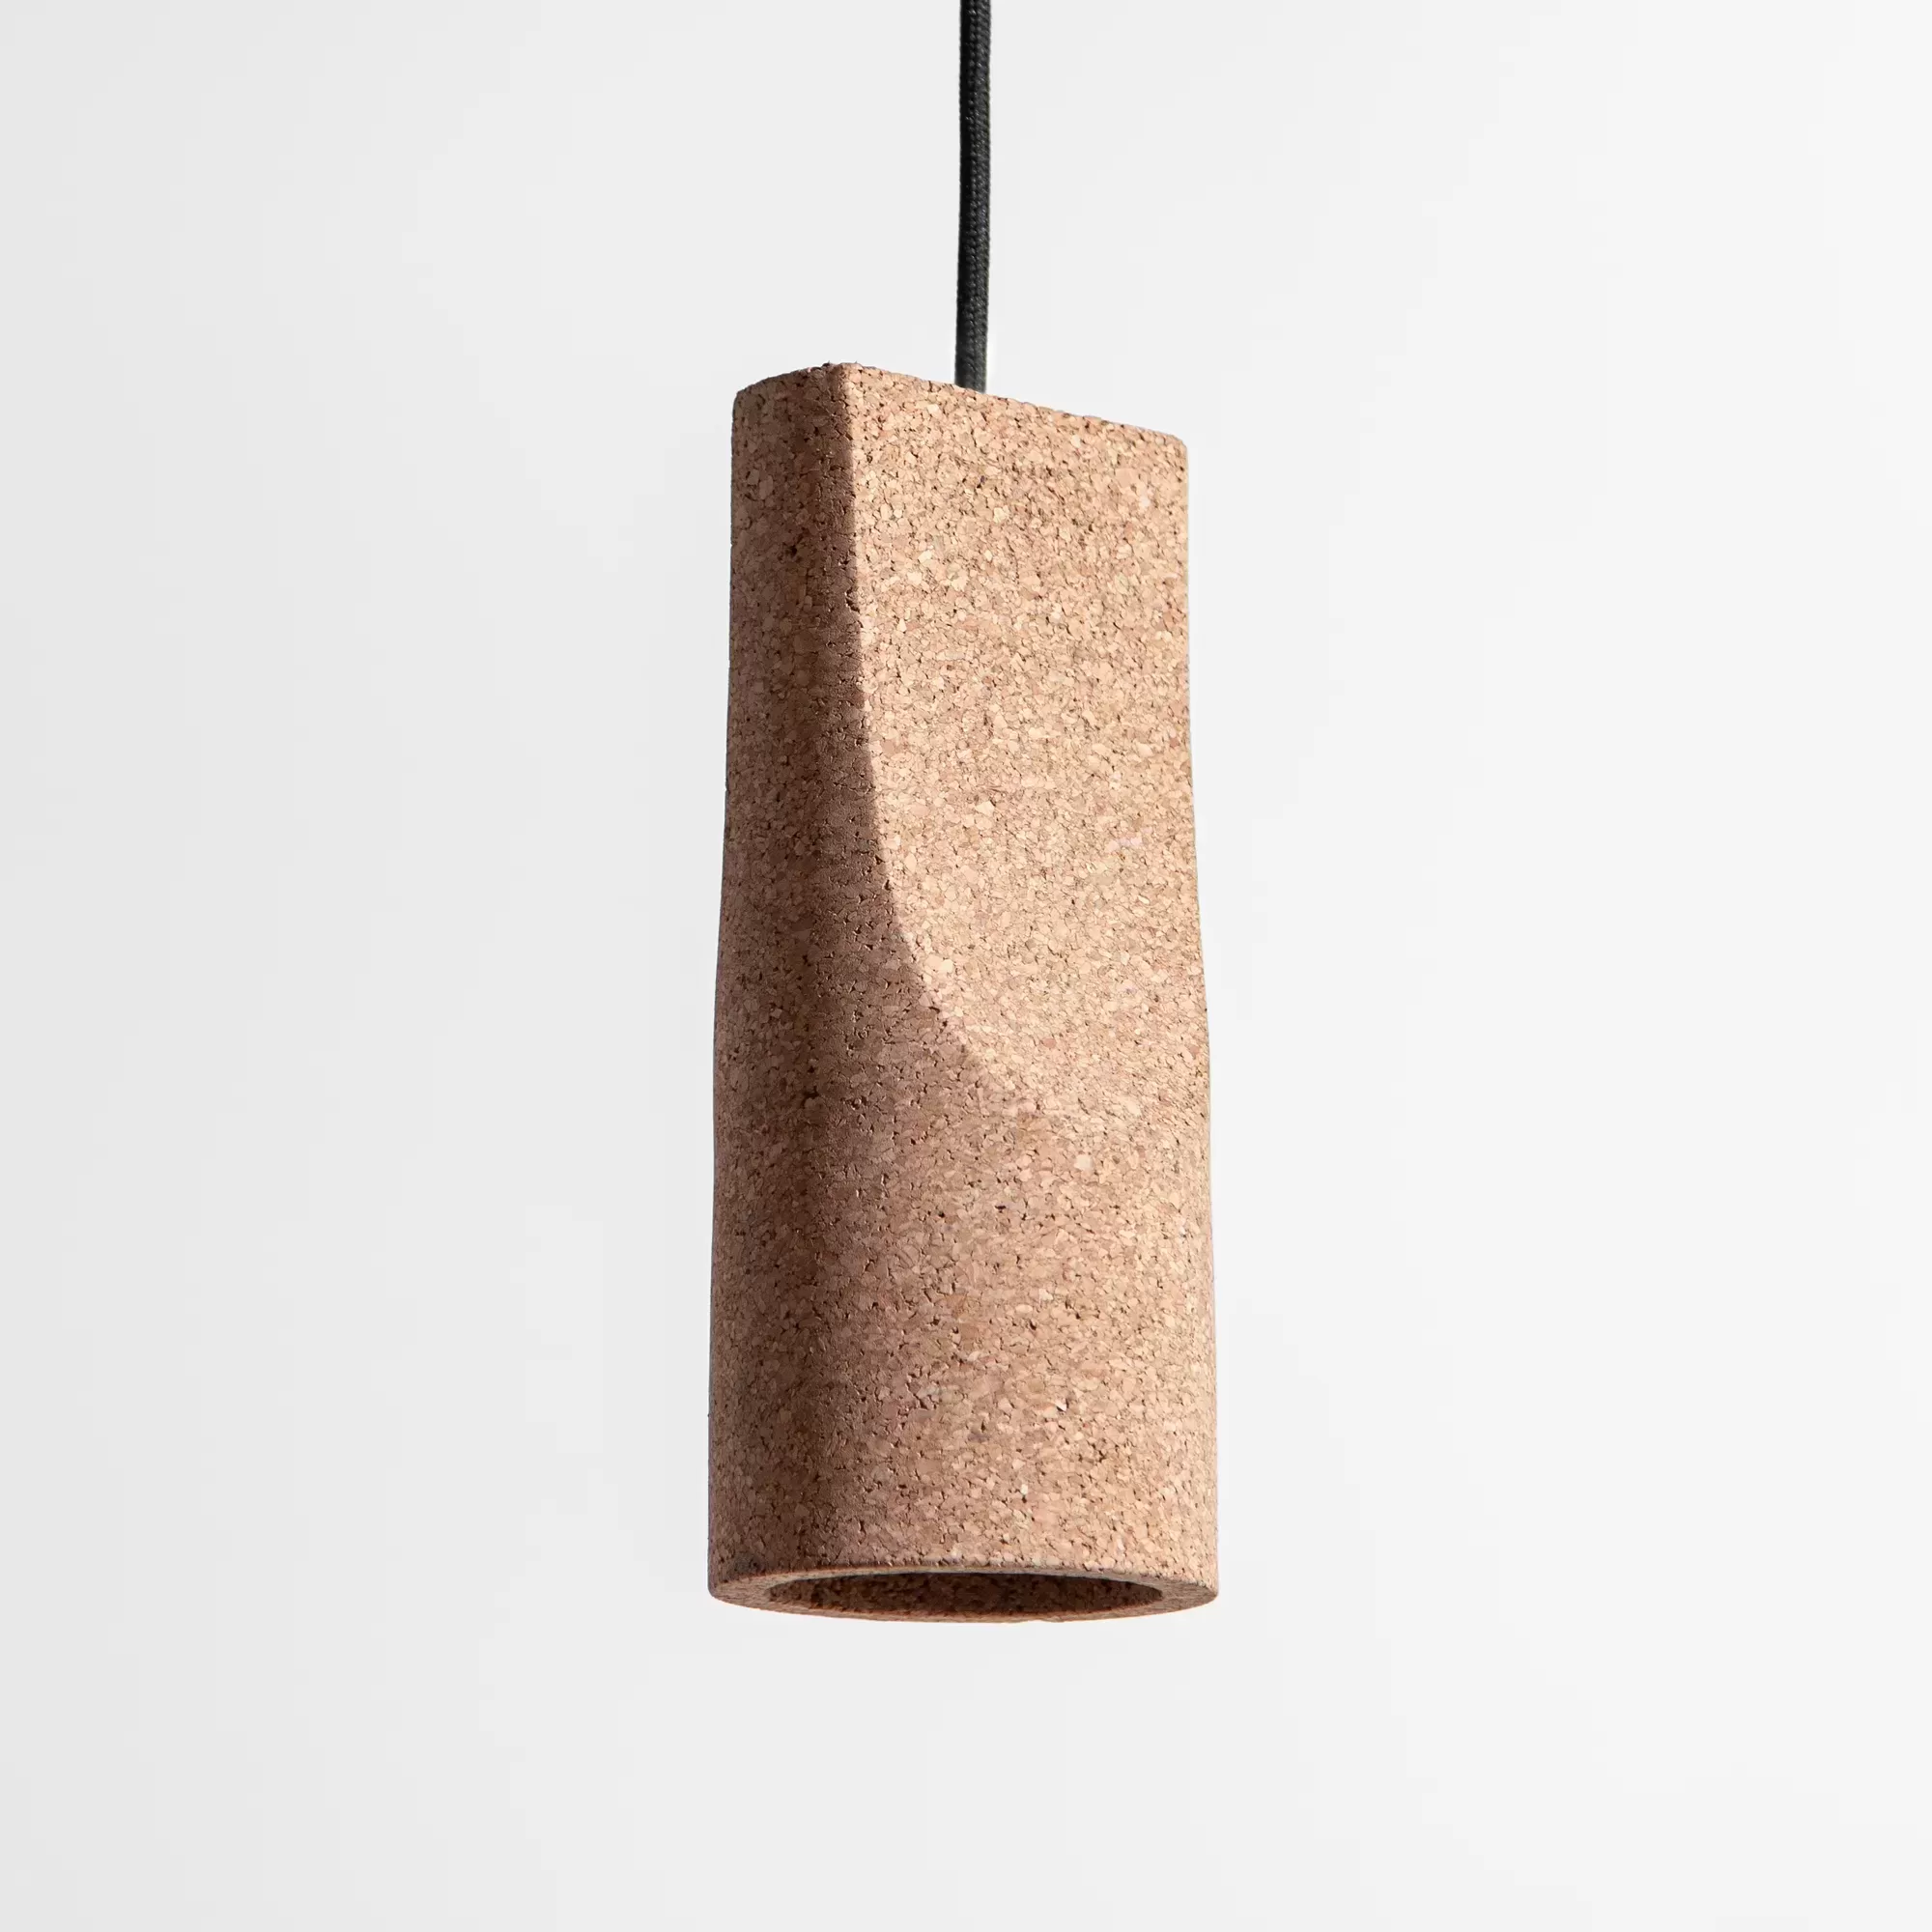 Cork Lamp for Hall- DESIGN BY MIGUEL SOEIRO